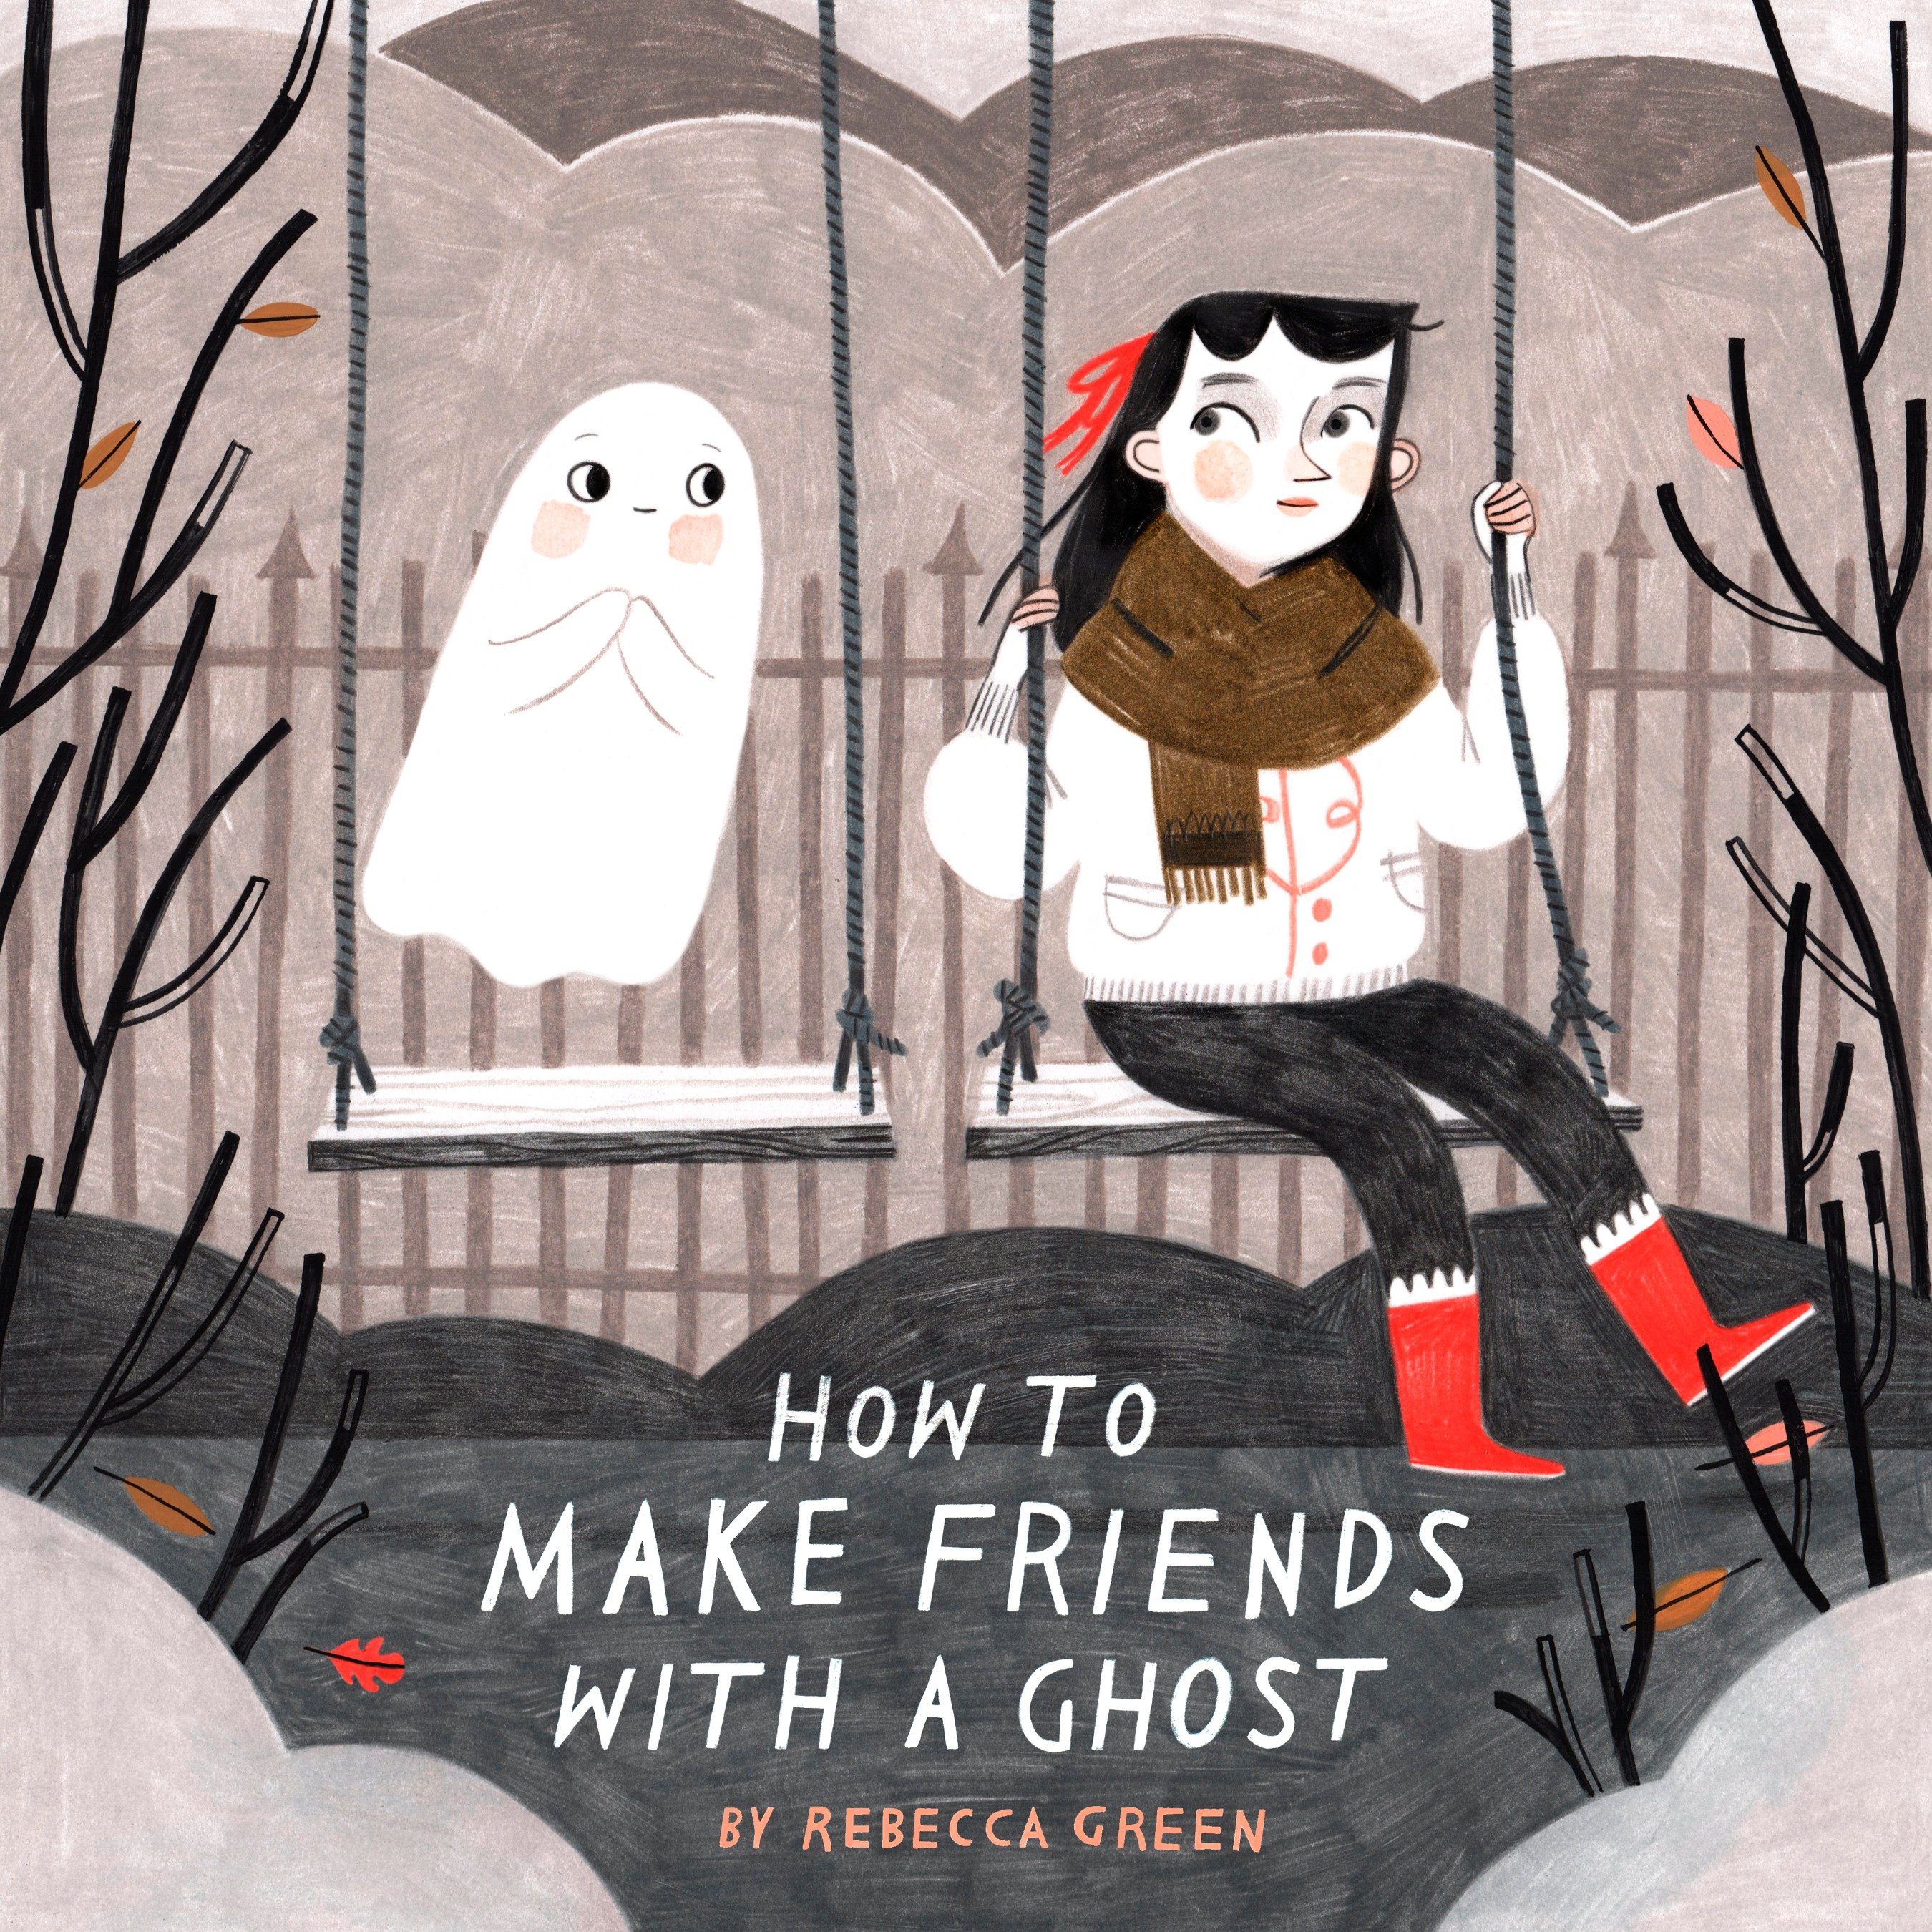 How To Make Friends With A Ghost (Hardcover Book)